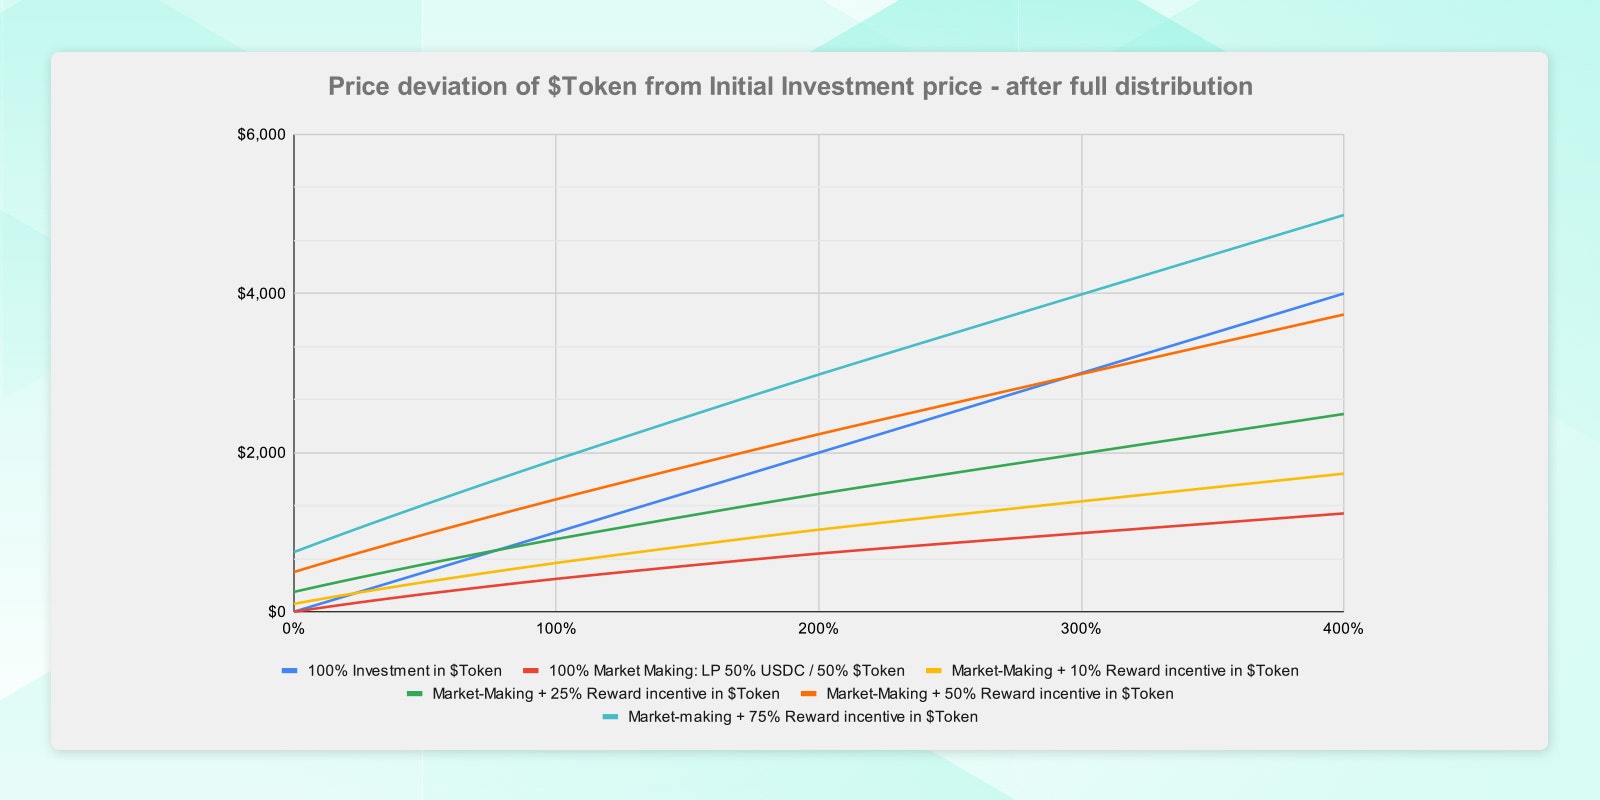 Price deviation of token from initial investment price